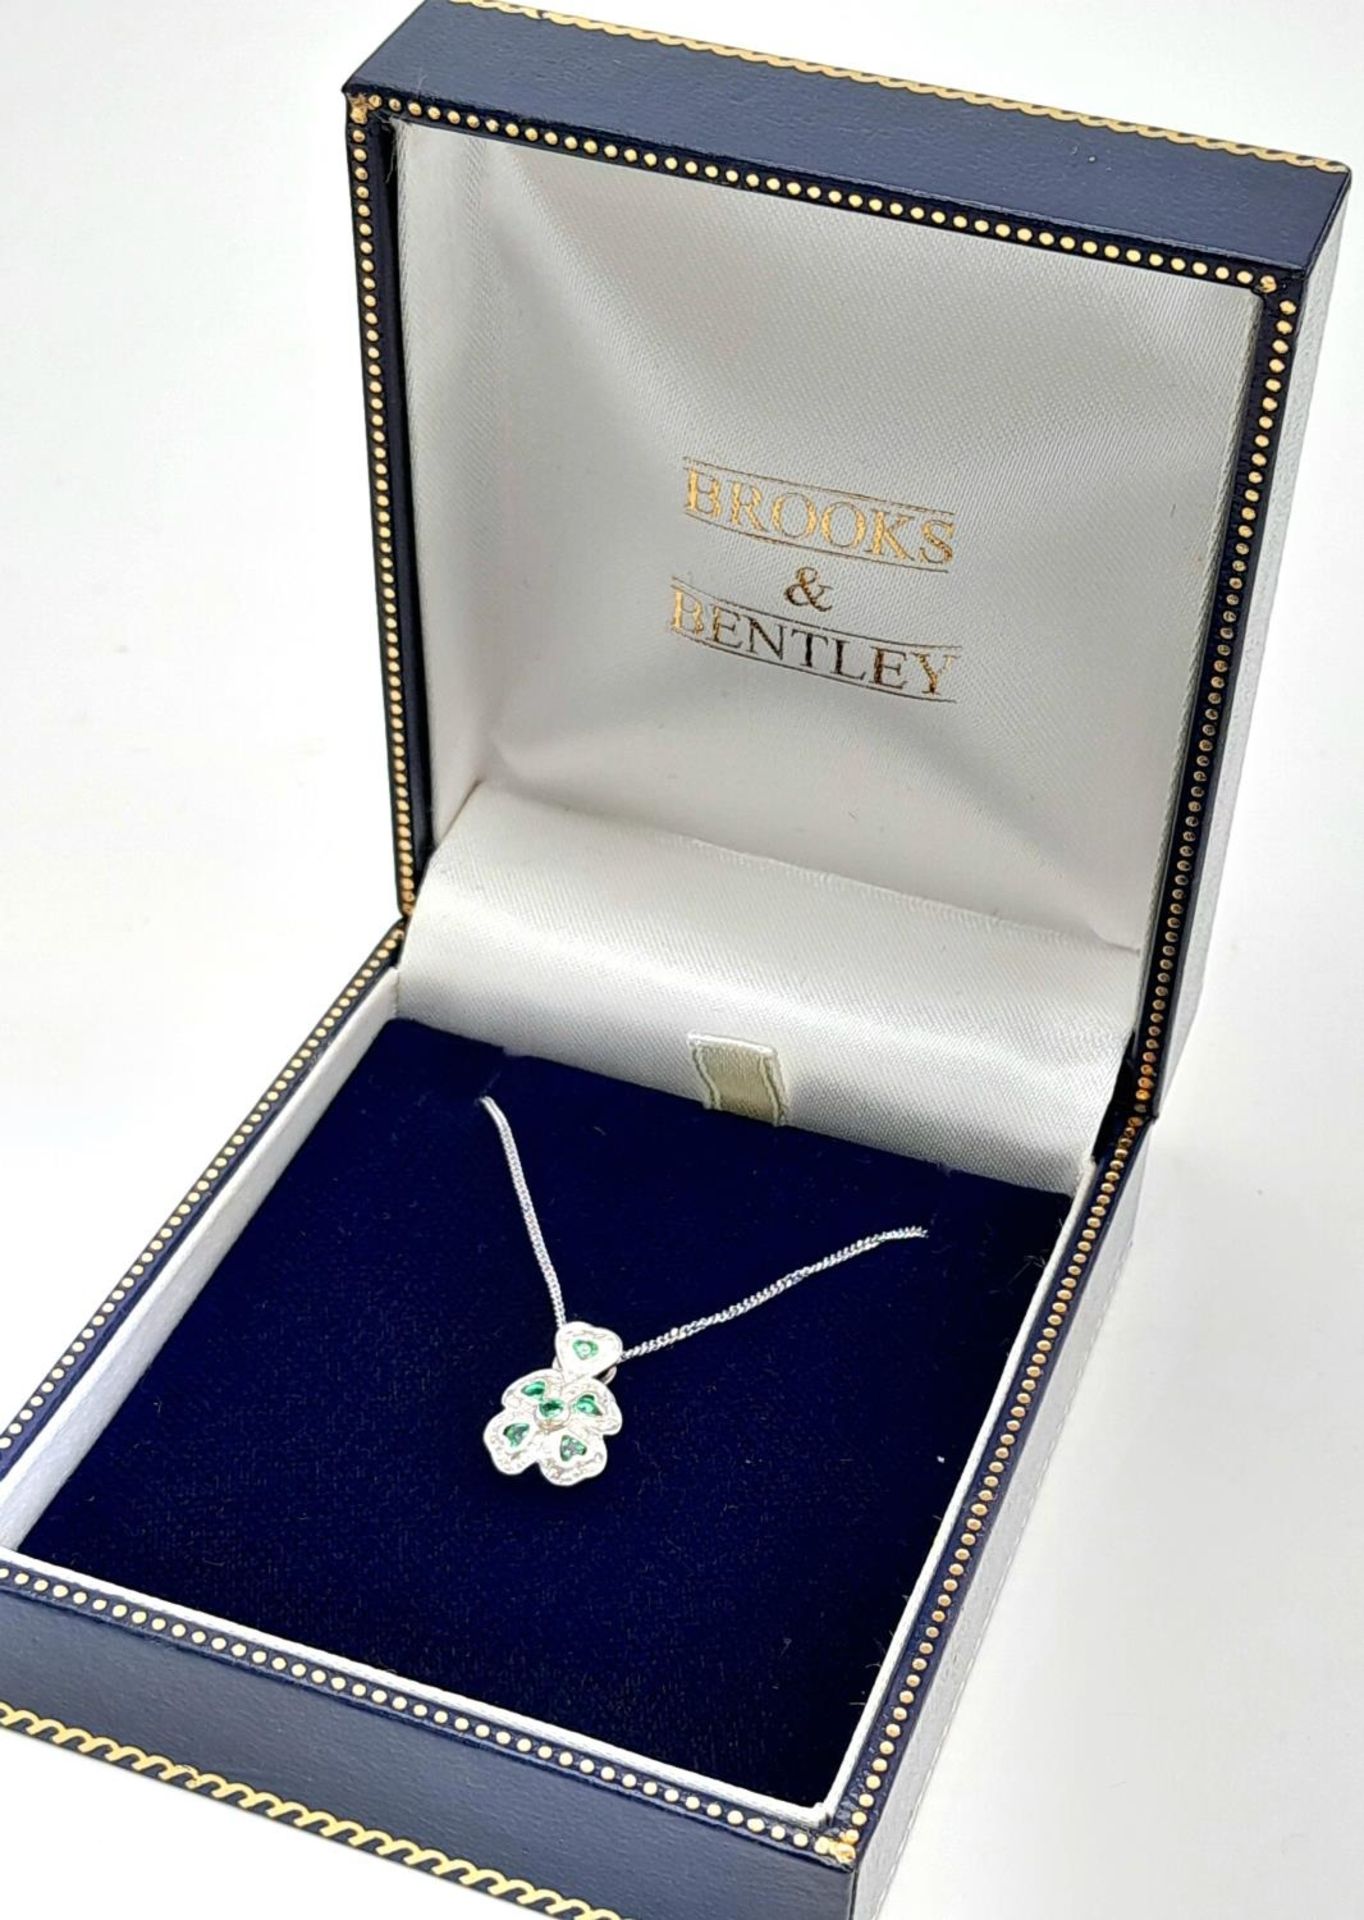 A 9K White Gold Emerald Clover Pendant on Necklace. Comes with presentation case. 1.4cm pendant, - Image 7 of 8